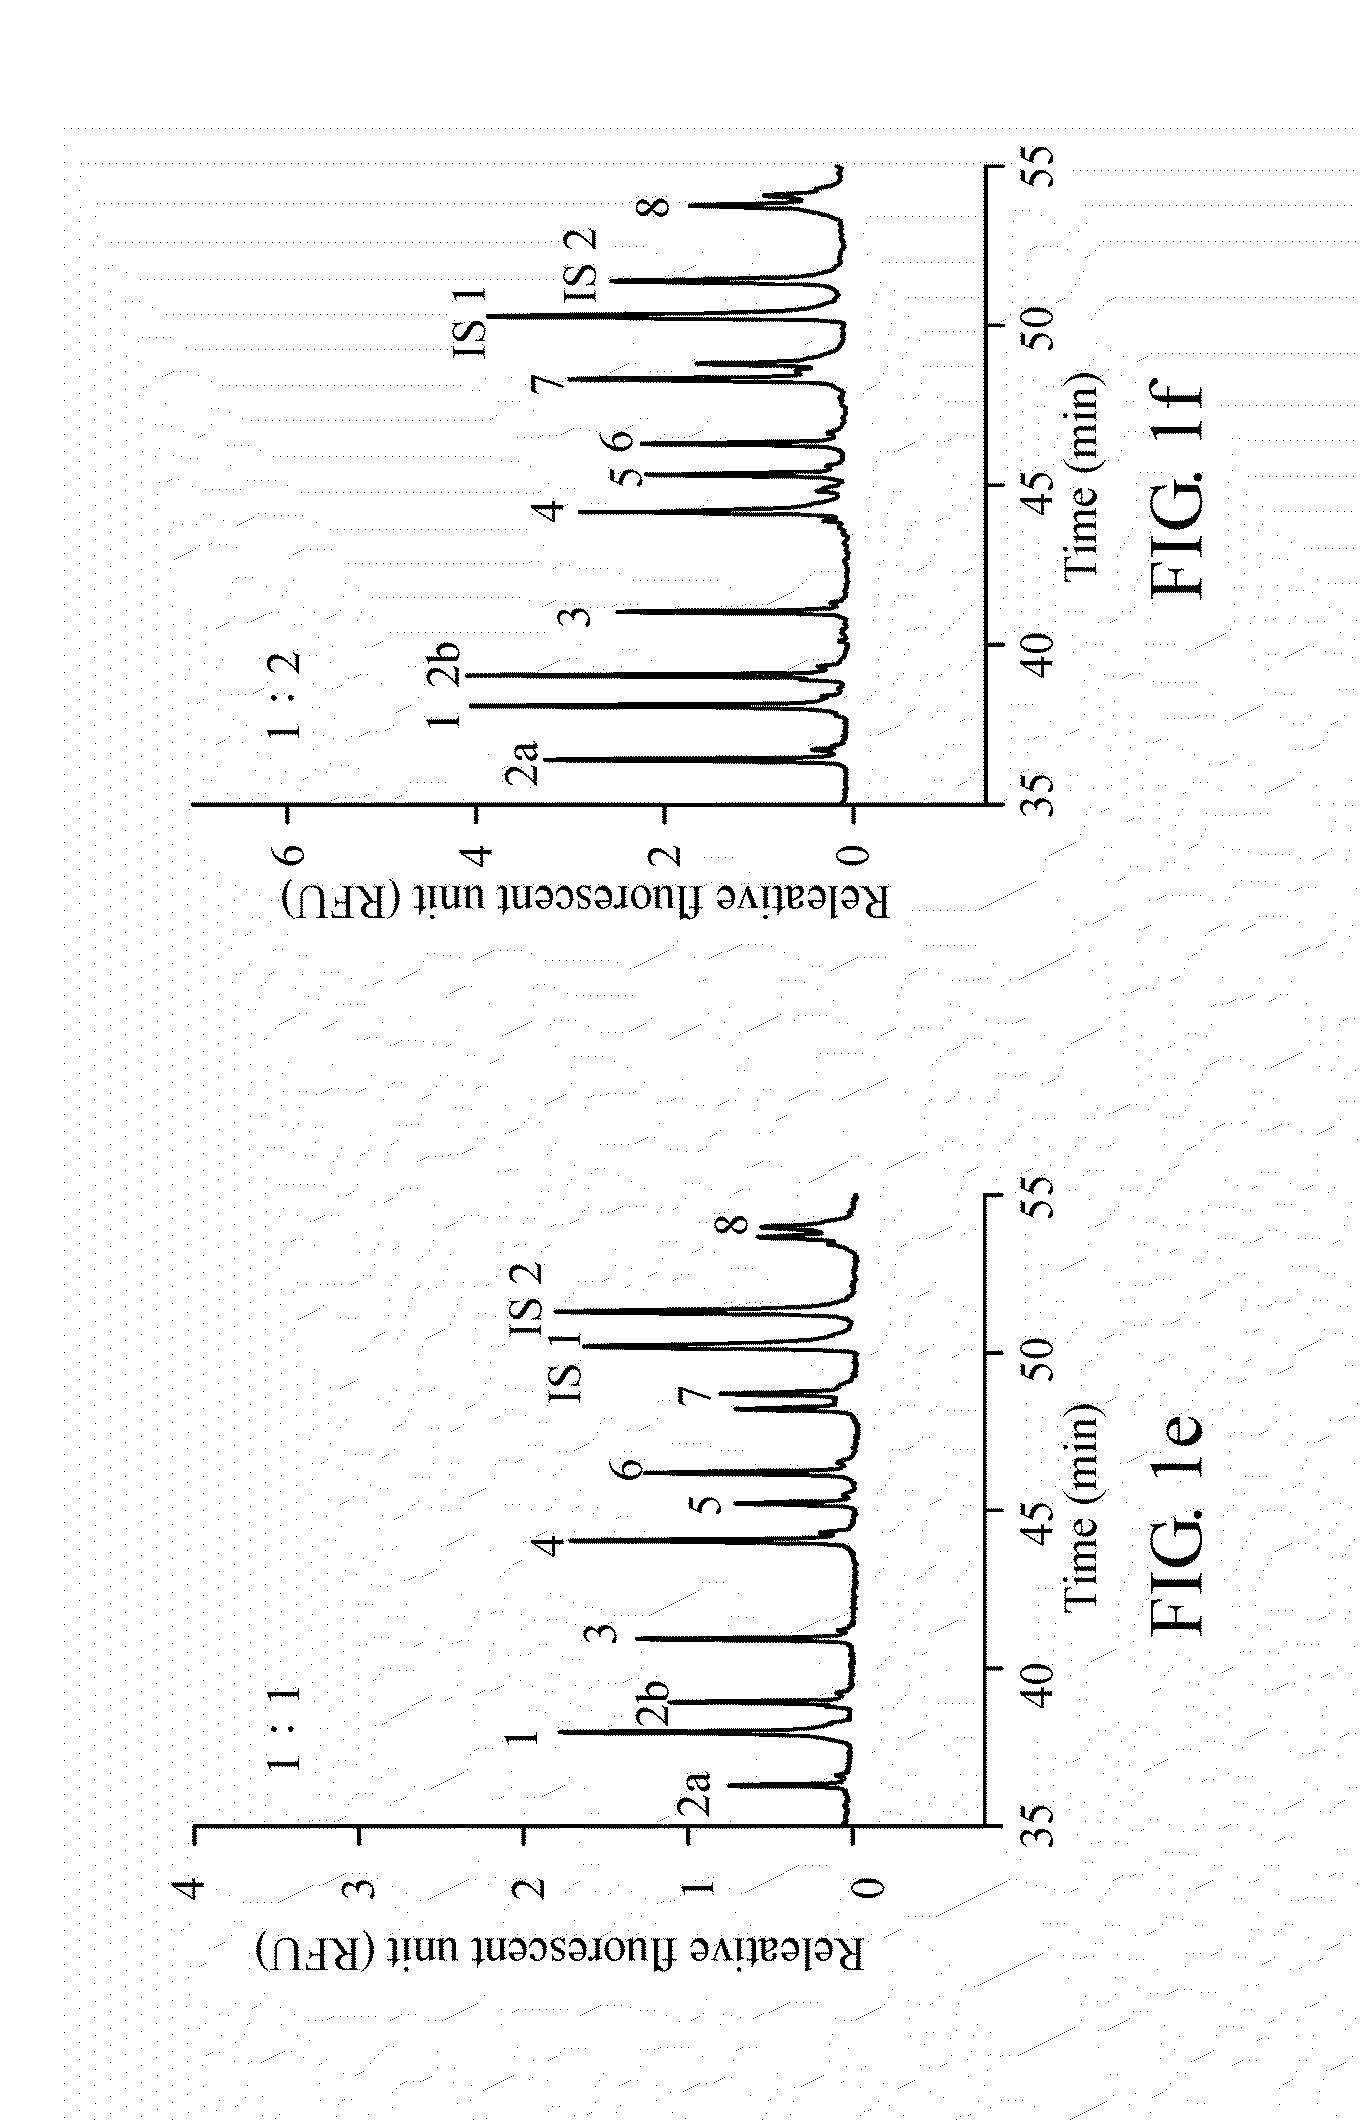 Method for diagnosing spinal muscular atrophy